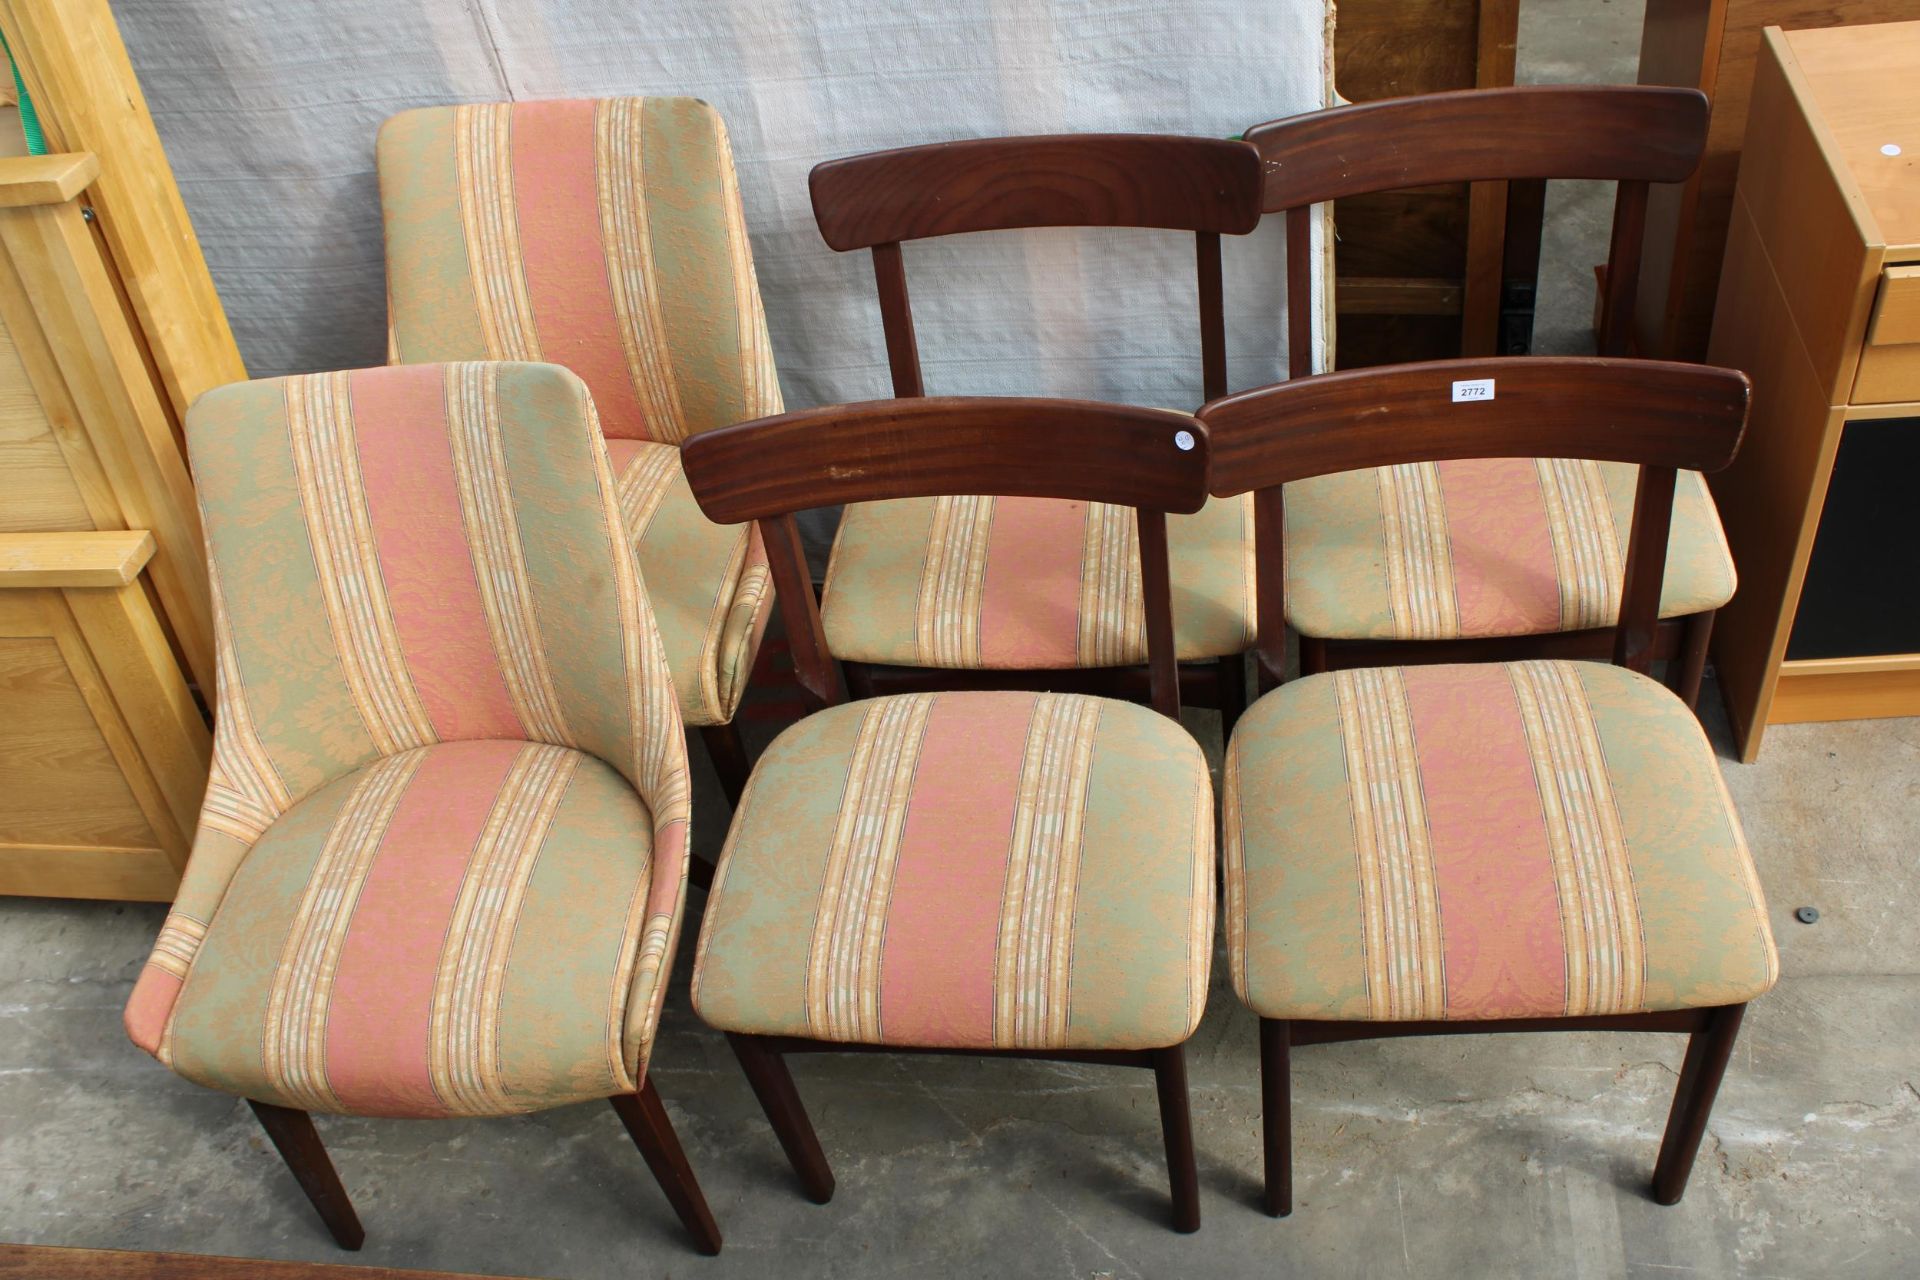 A SET OF FOUR RETRO TEAK DINING CHAIRS AND A PAIR OF CHAIRS IN MATCHING UPHOLSTERY